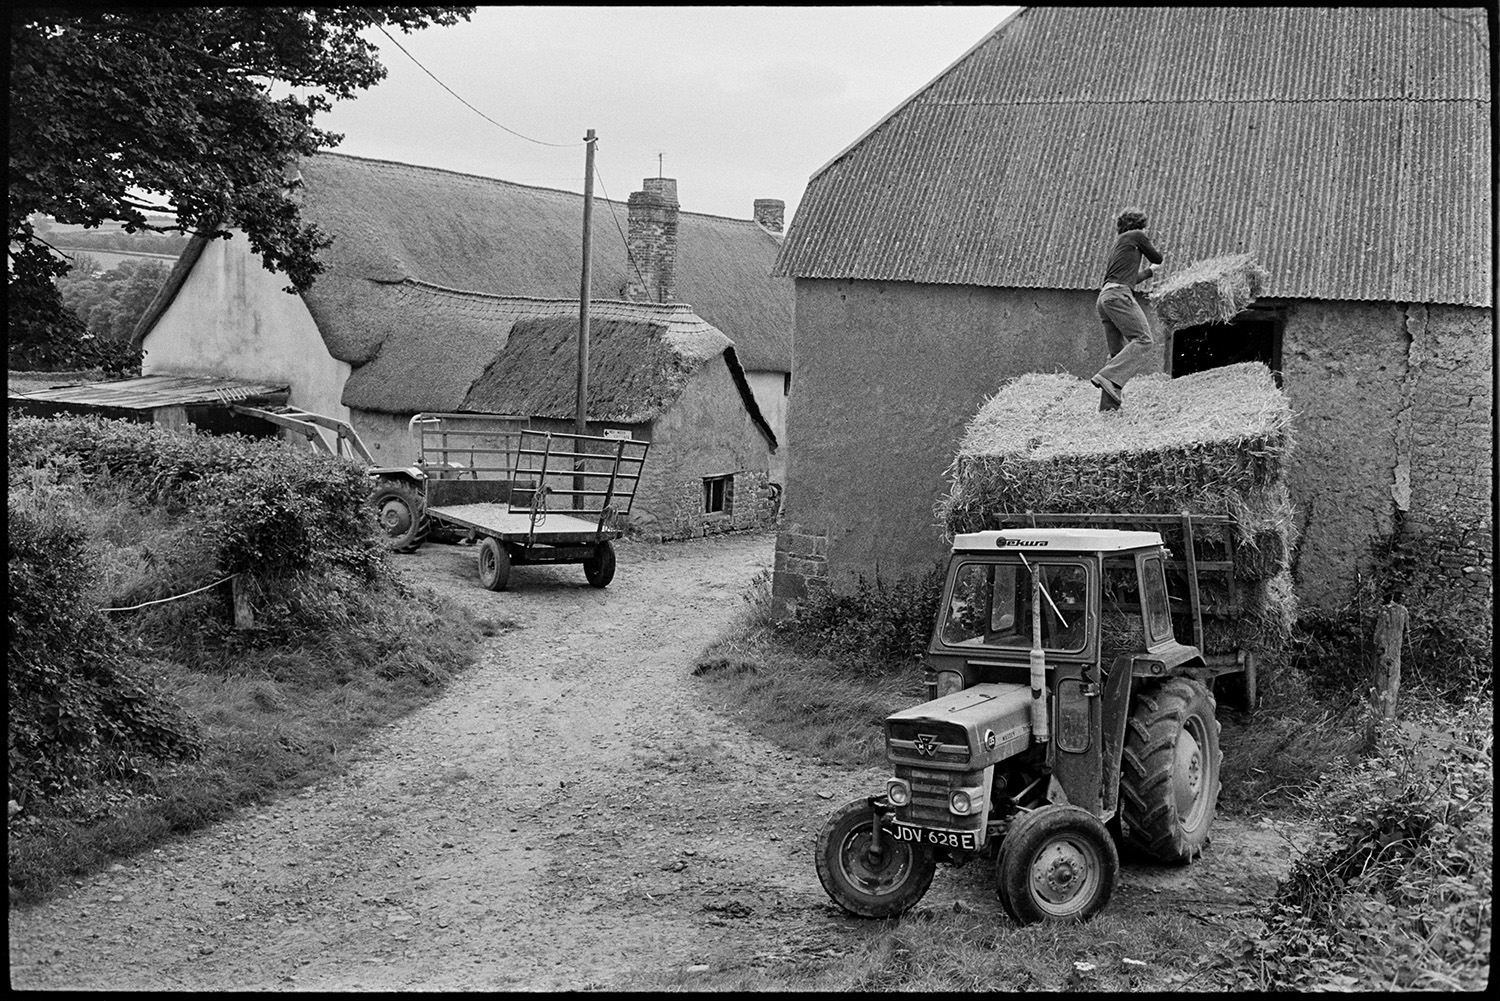 Loading hay into barn tallet from tractor and trailer. 
[A man loading hay bales into a barn tallet from a tractor and trailer at Higher Week, Iddesleigh. Another tractor and trailer and thatched farmhouse are visible in the background.]